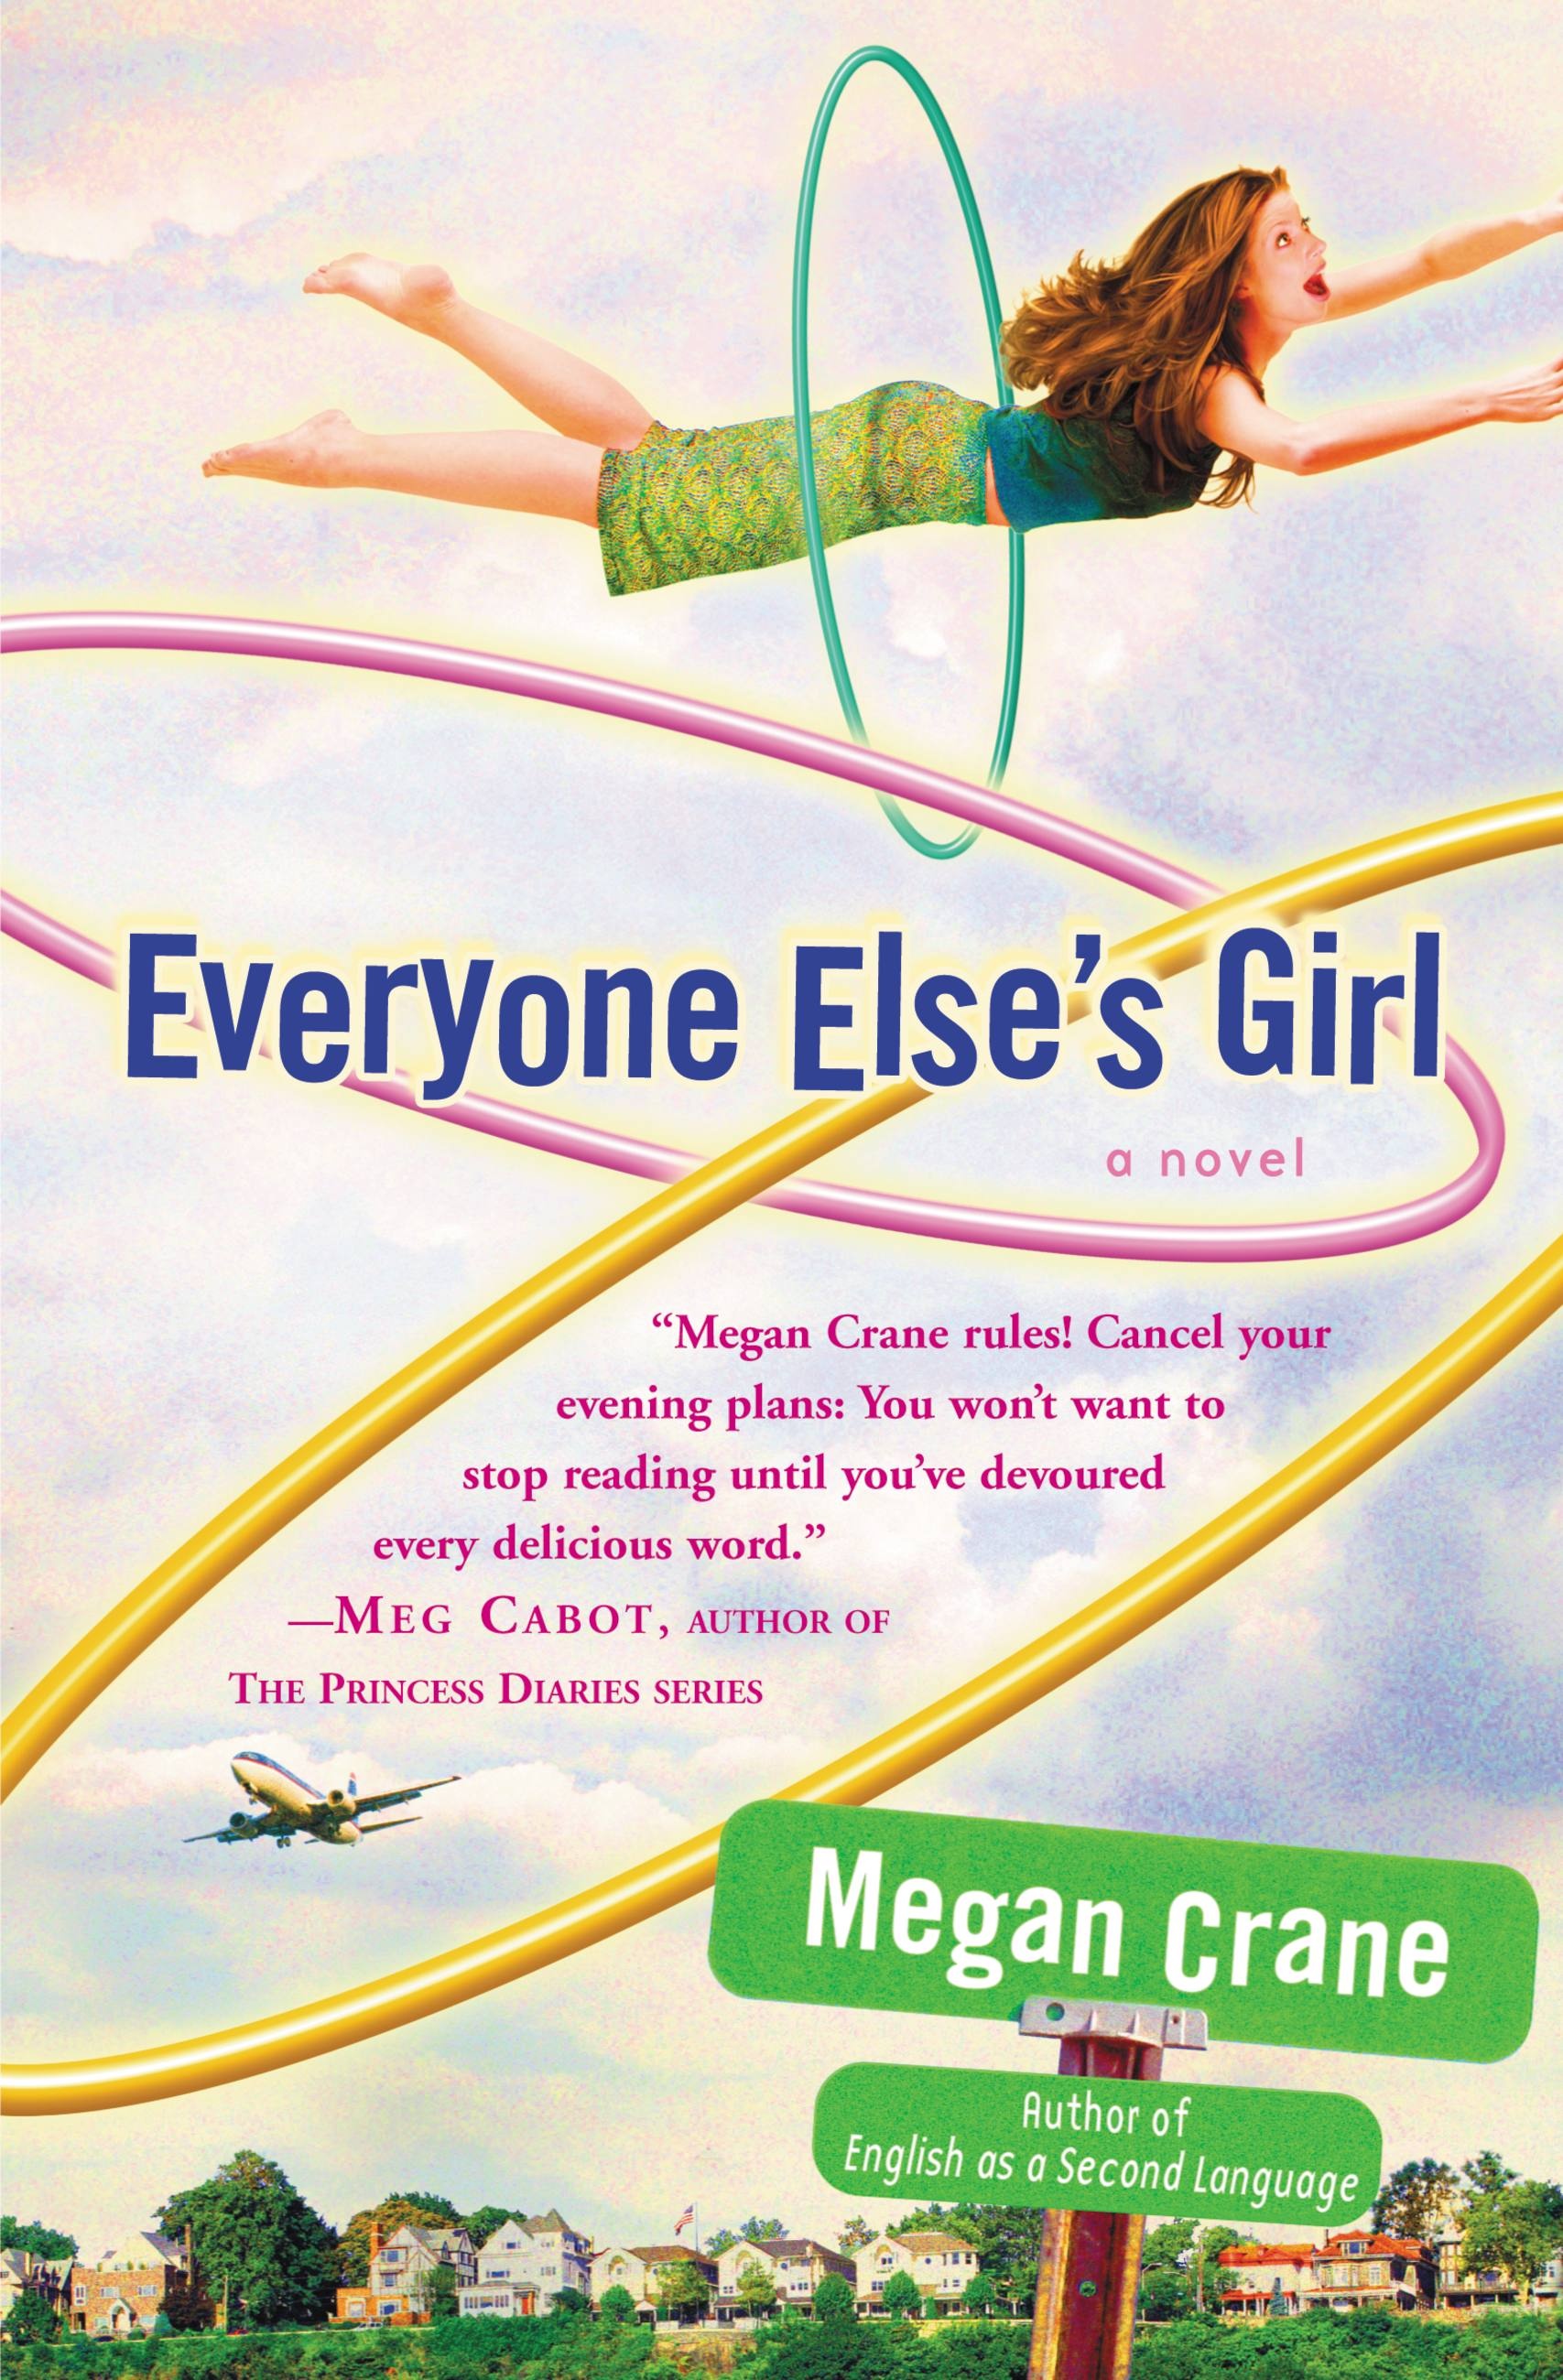 Everyone Elses Girl by Megan Crane Hachette Book Group image